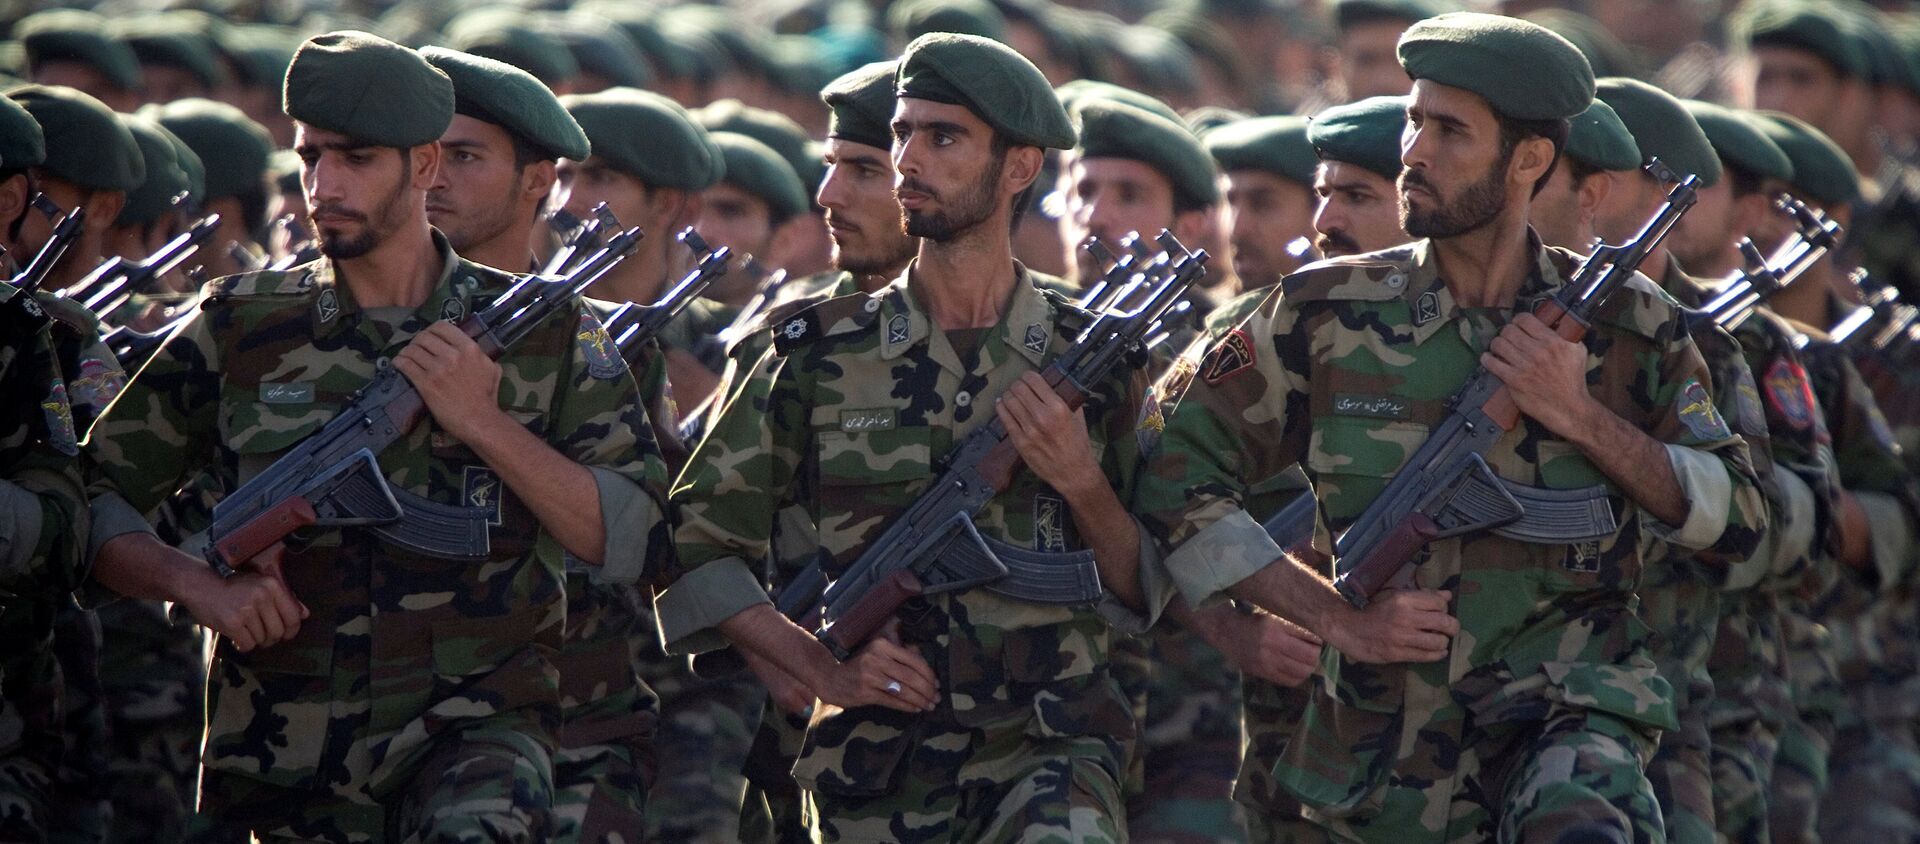 Members of Iran's Revolutionary Guards march during a military parade to commemorate the 1980-88 Iran-Iraq war in Tehran. - Sputnik International, 1920, 27.04.2021